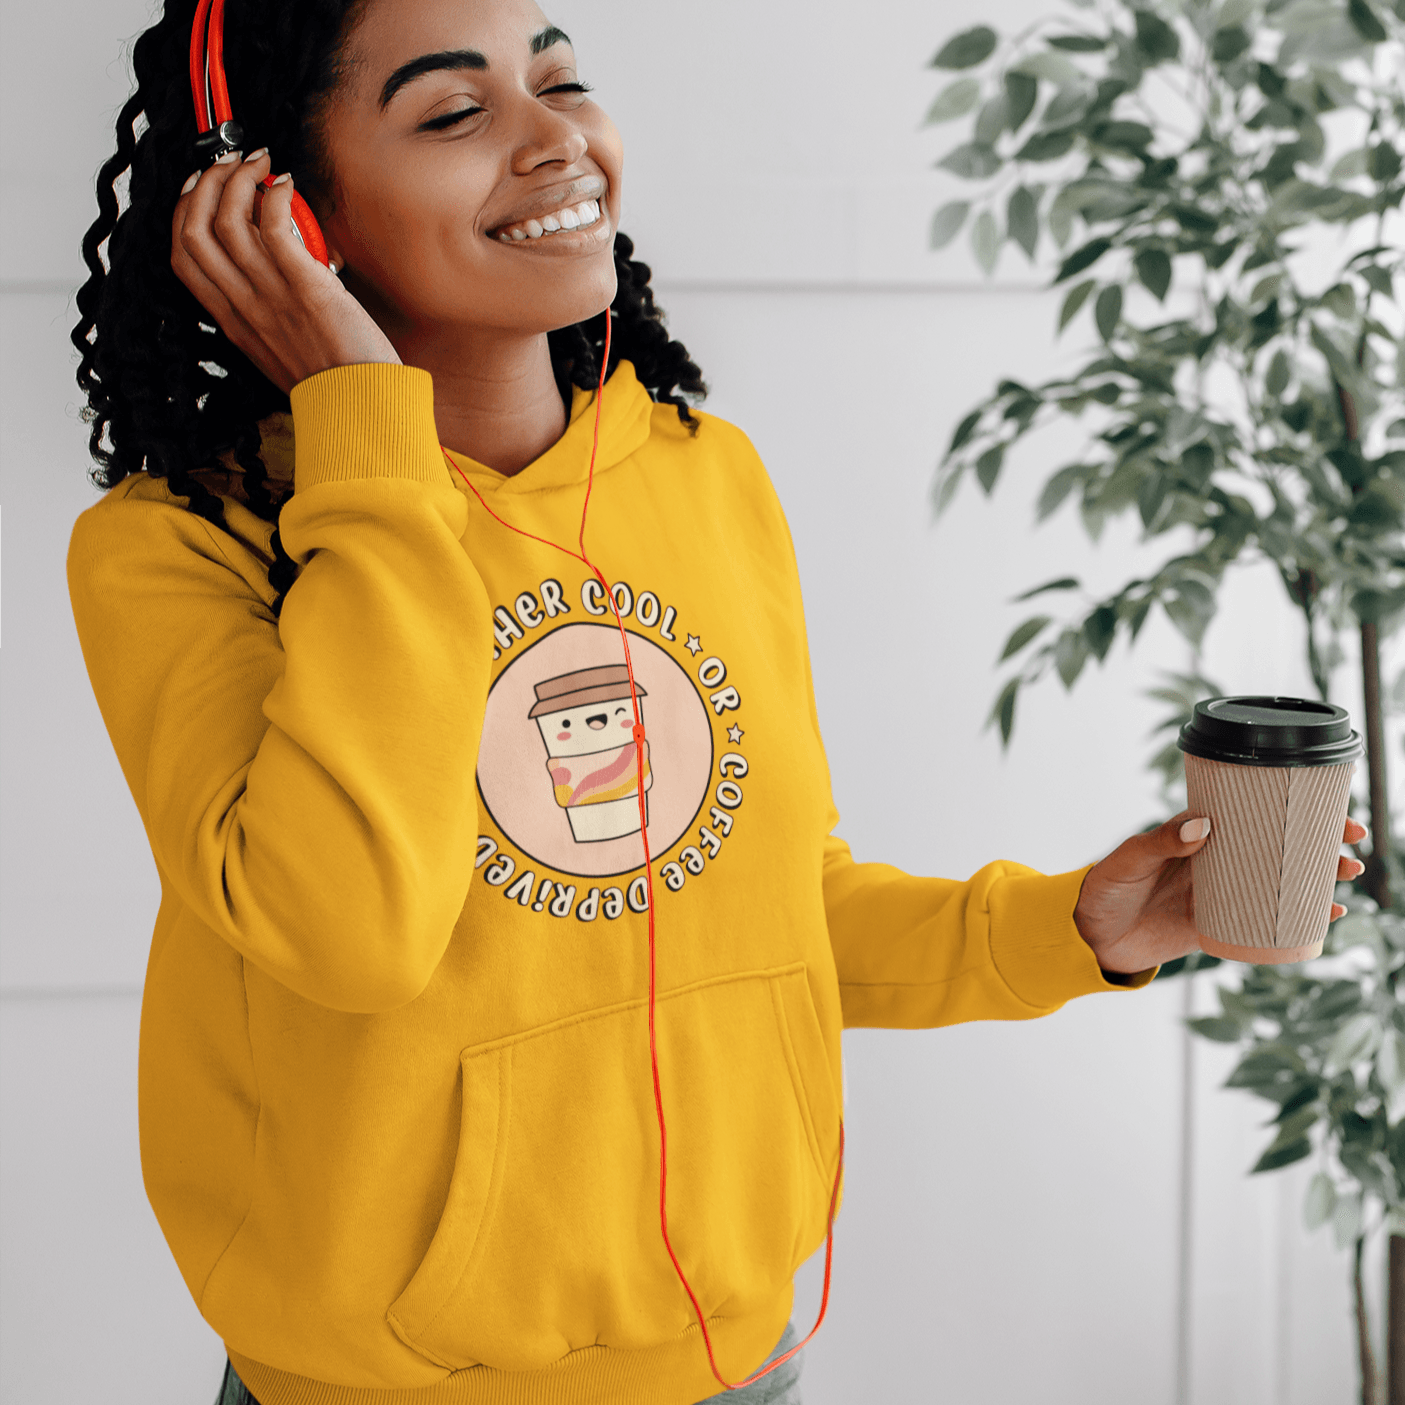 Either Cool or Coffee Deprived Unisex Hoodies - Cute Stuff India